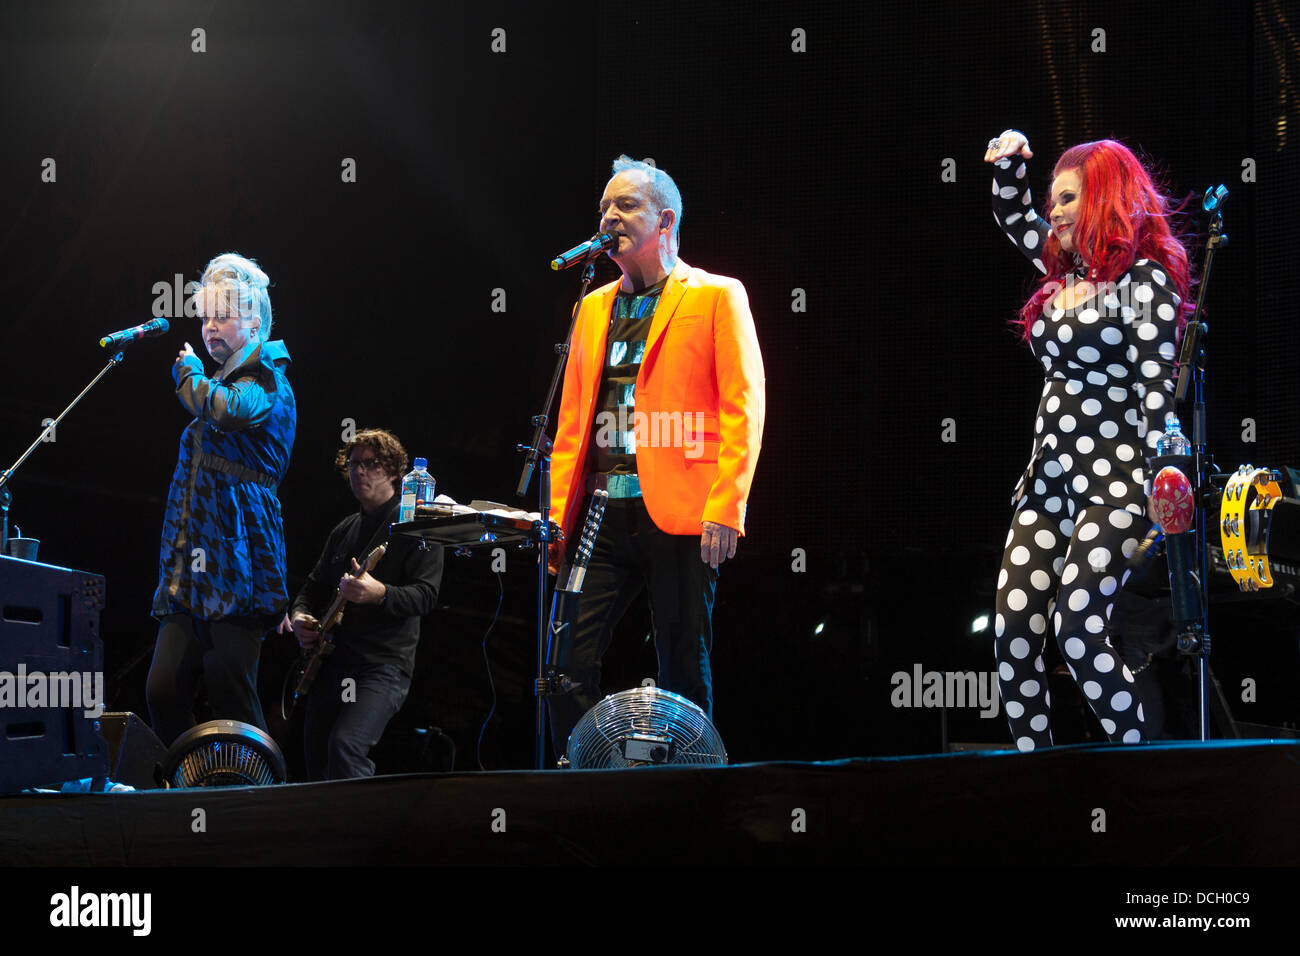 Remenham; Henley-on-Thames; Oxfordshire; UK. 17 August 2013. (Left to right) Cindy Wilson, Fred Schneider and Kate Pierson of the American new wave band THE B-52s perform on-stage at the 2013 'REWIND - The 80s Festival' held 16-17-18 August 2013. Photograph Credit:  2013 John Henshall/Alamy Live News. PER0351 Stock Photo